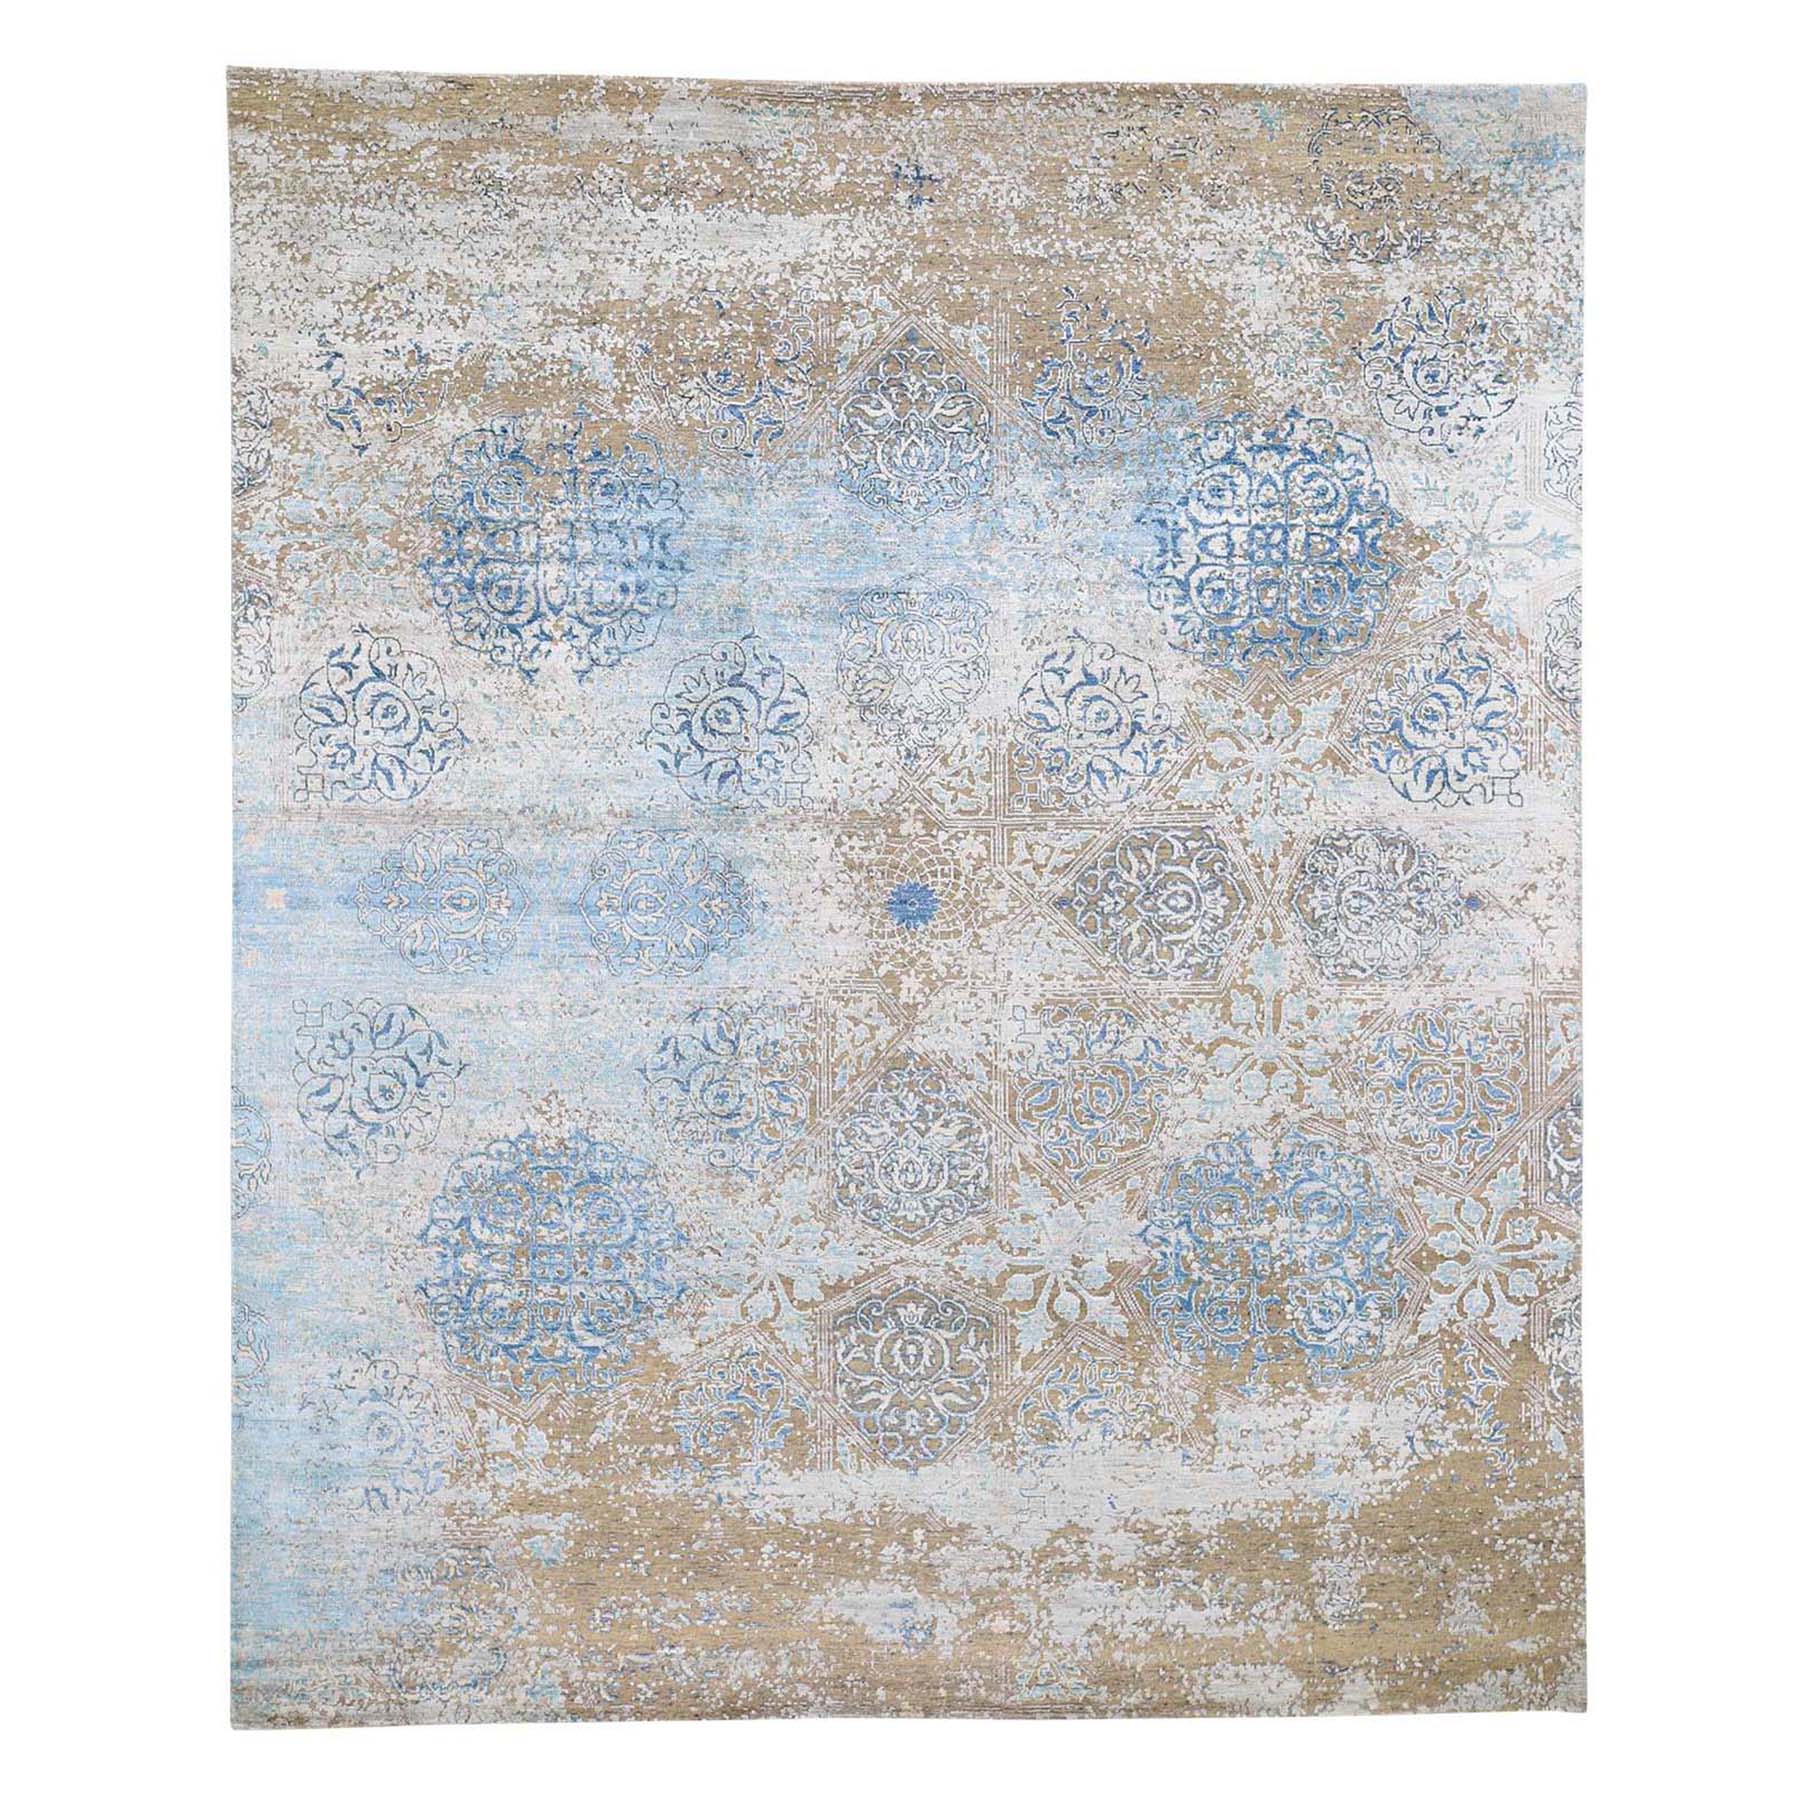 8'1"X9'9" Wool And Silk Textured Hi-Low Pile Ottoman Influence Hand-Knotted Modern Oriental Rug moad6a6e